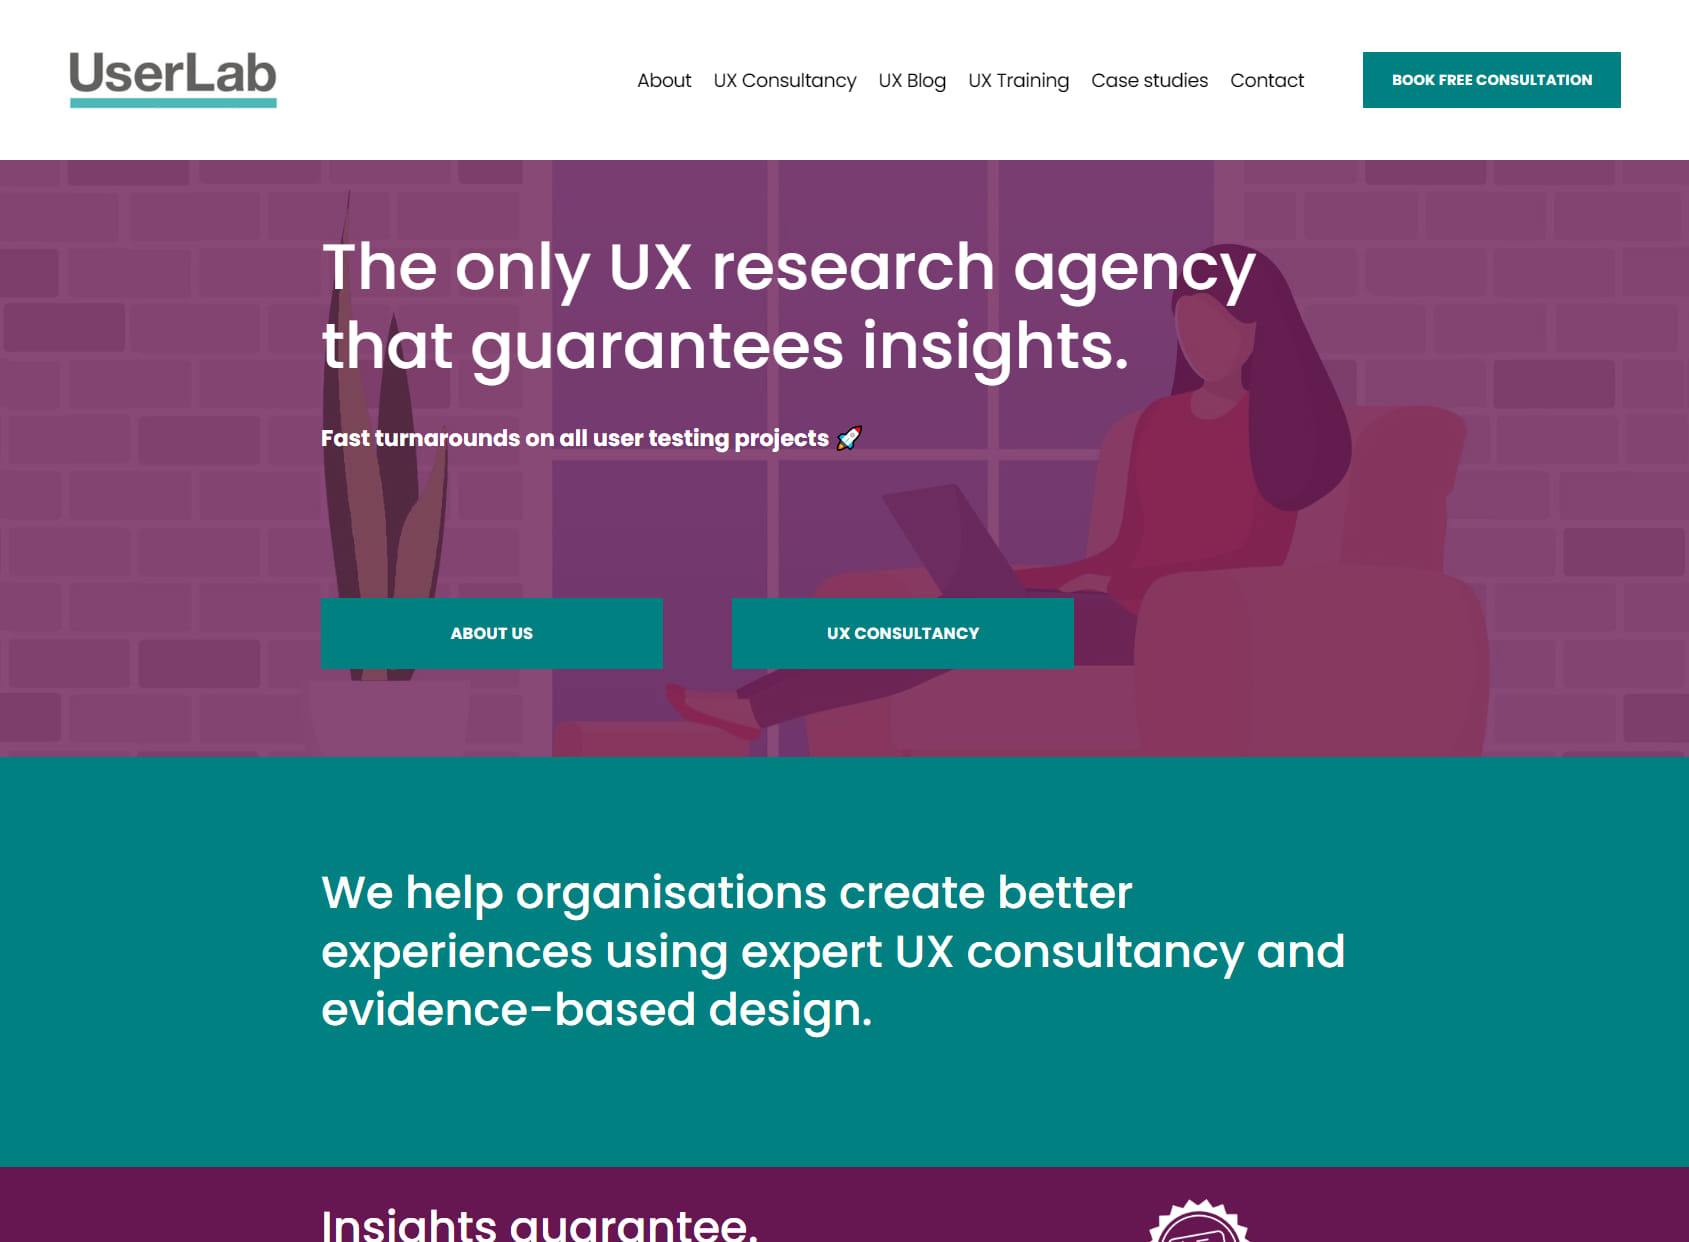 UserLab UX Research